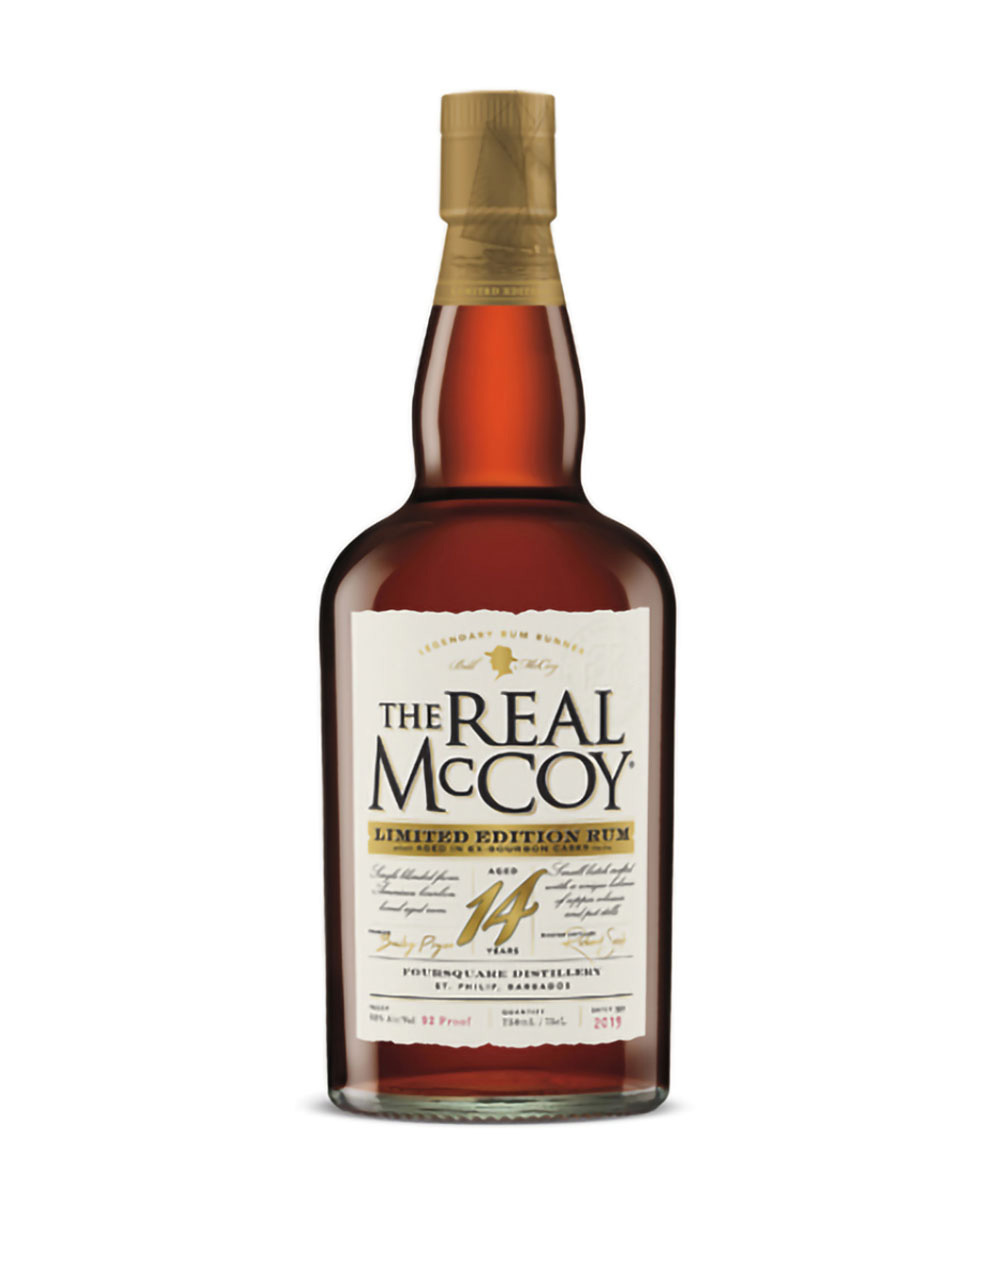 The Real Mccoy Limited Edition 14 Year